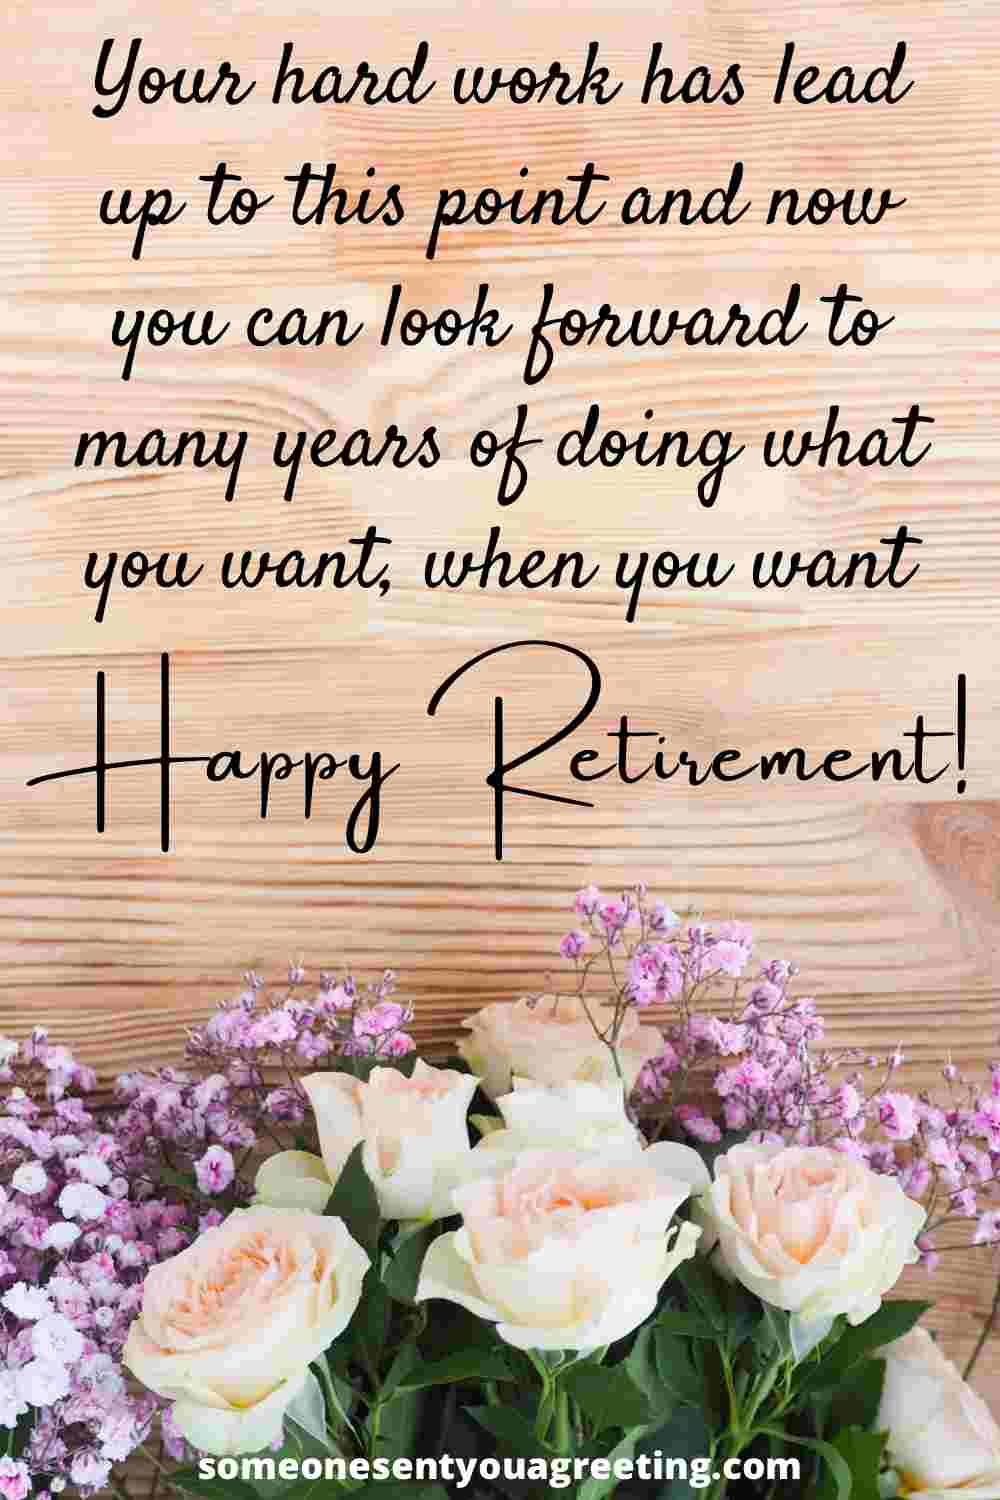 33 Retirement Messages for Uncle - Someone Sent You A Greeting